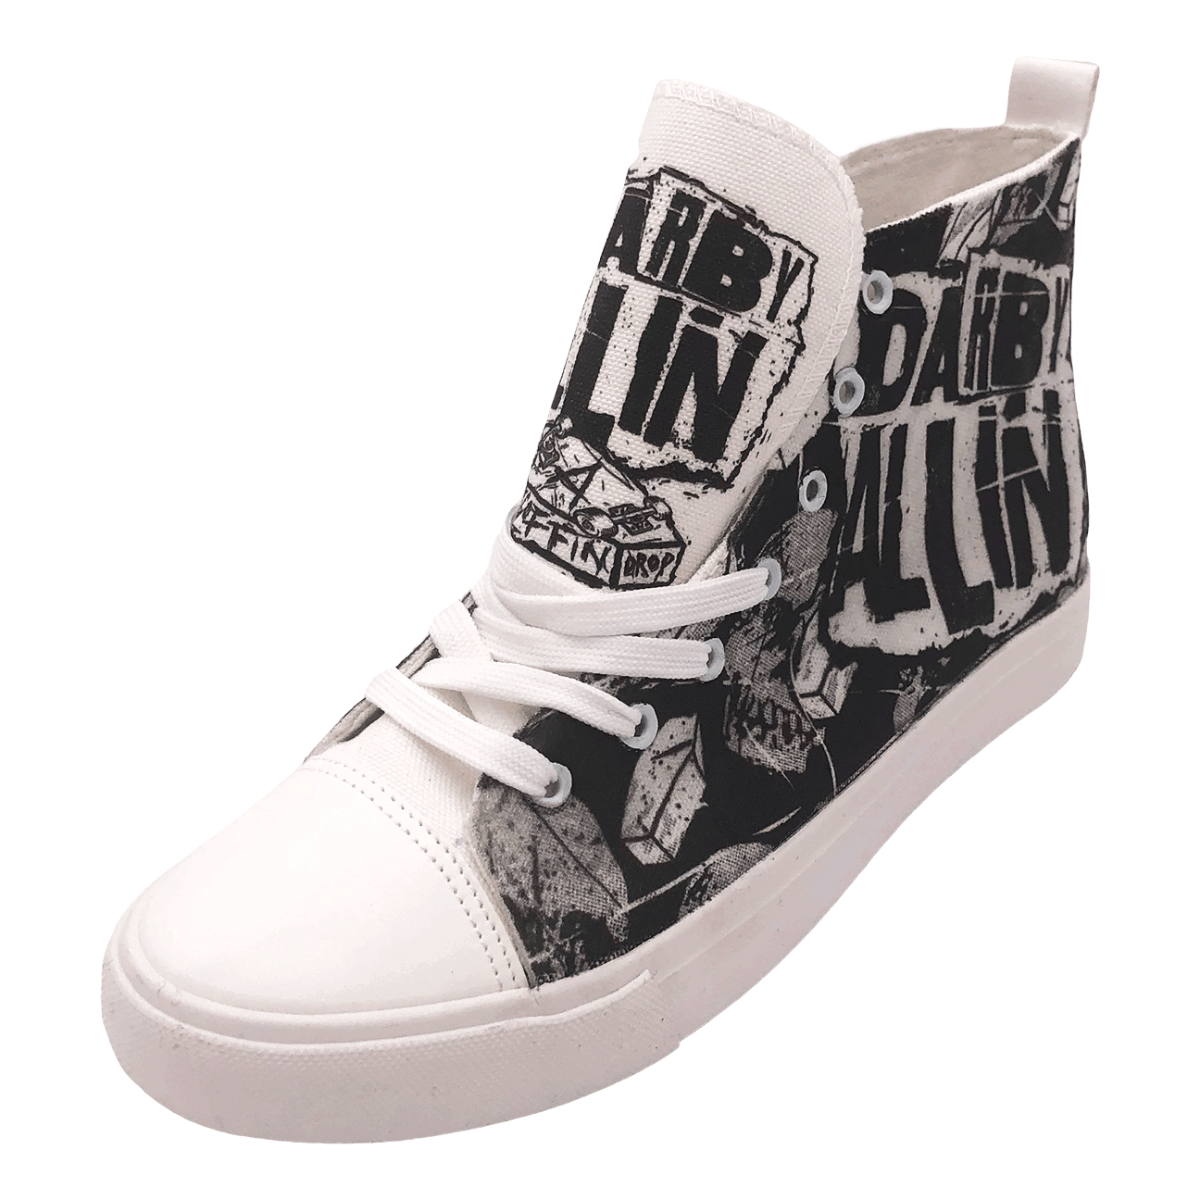 AEW SUPERKICKS SNEAKERS OFFICIALLY RELEASED | PWInsider.com